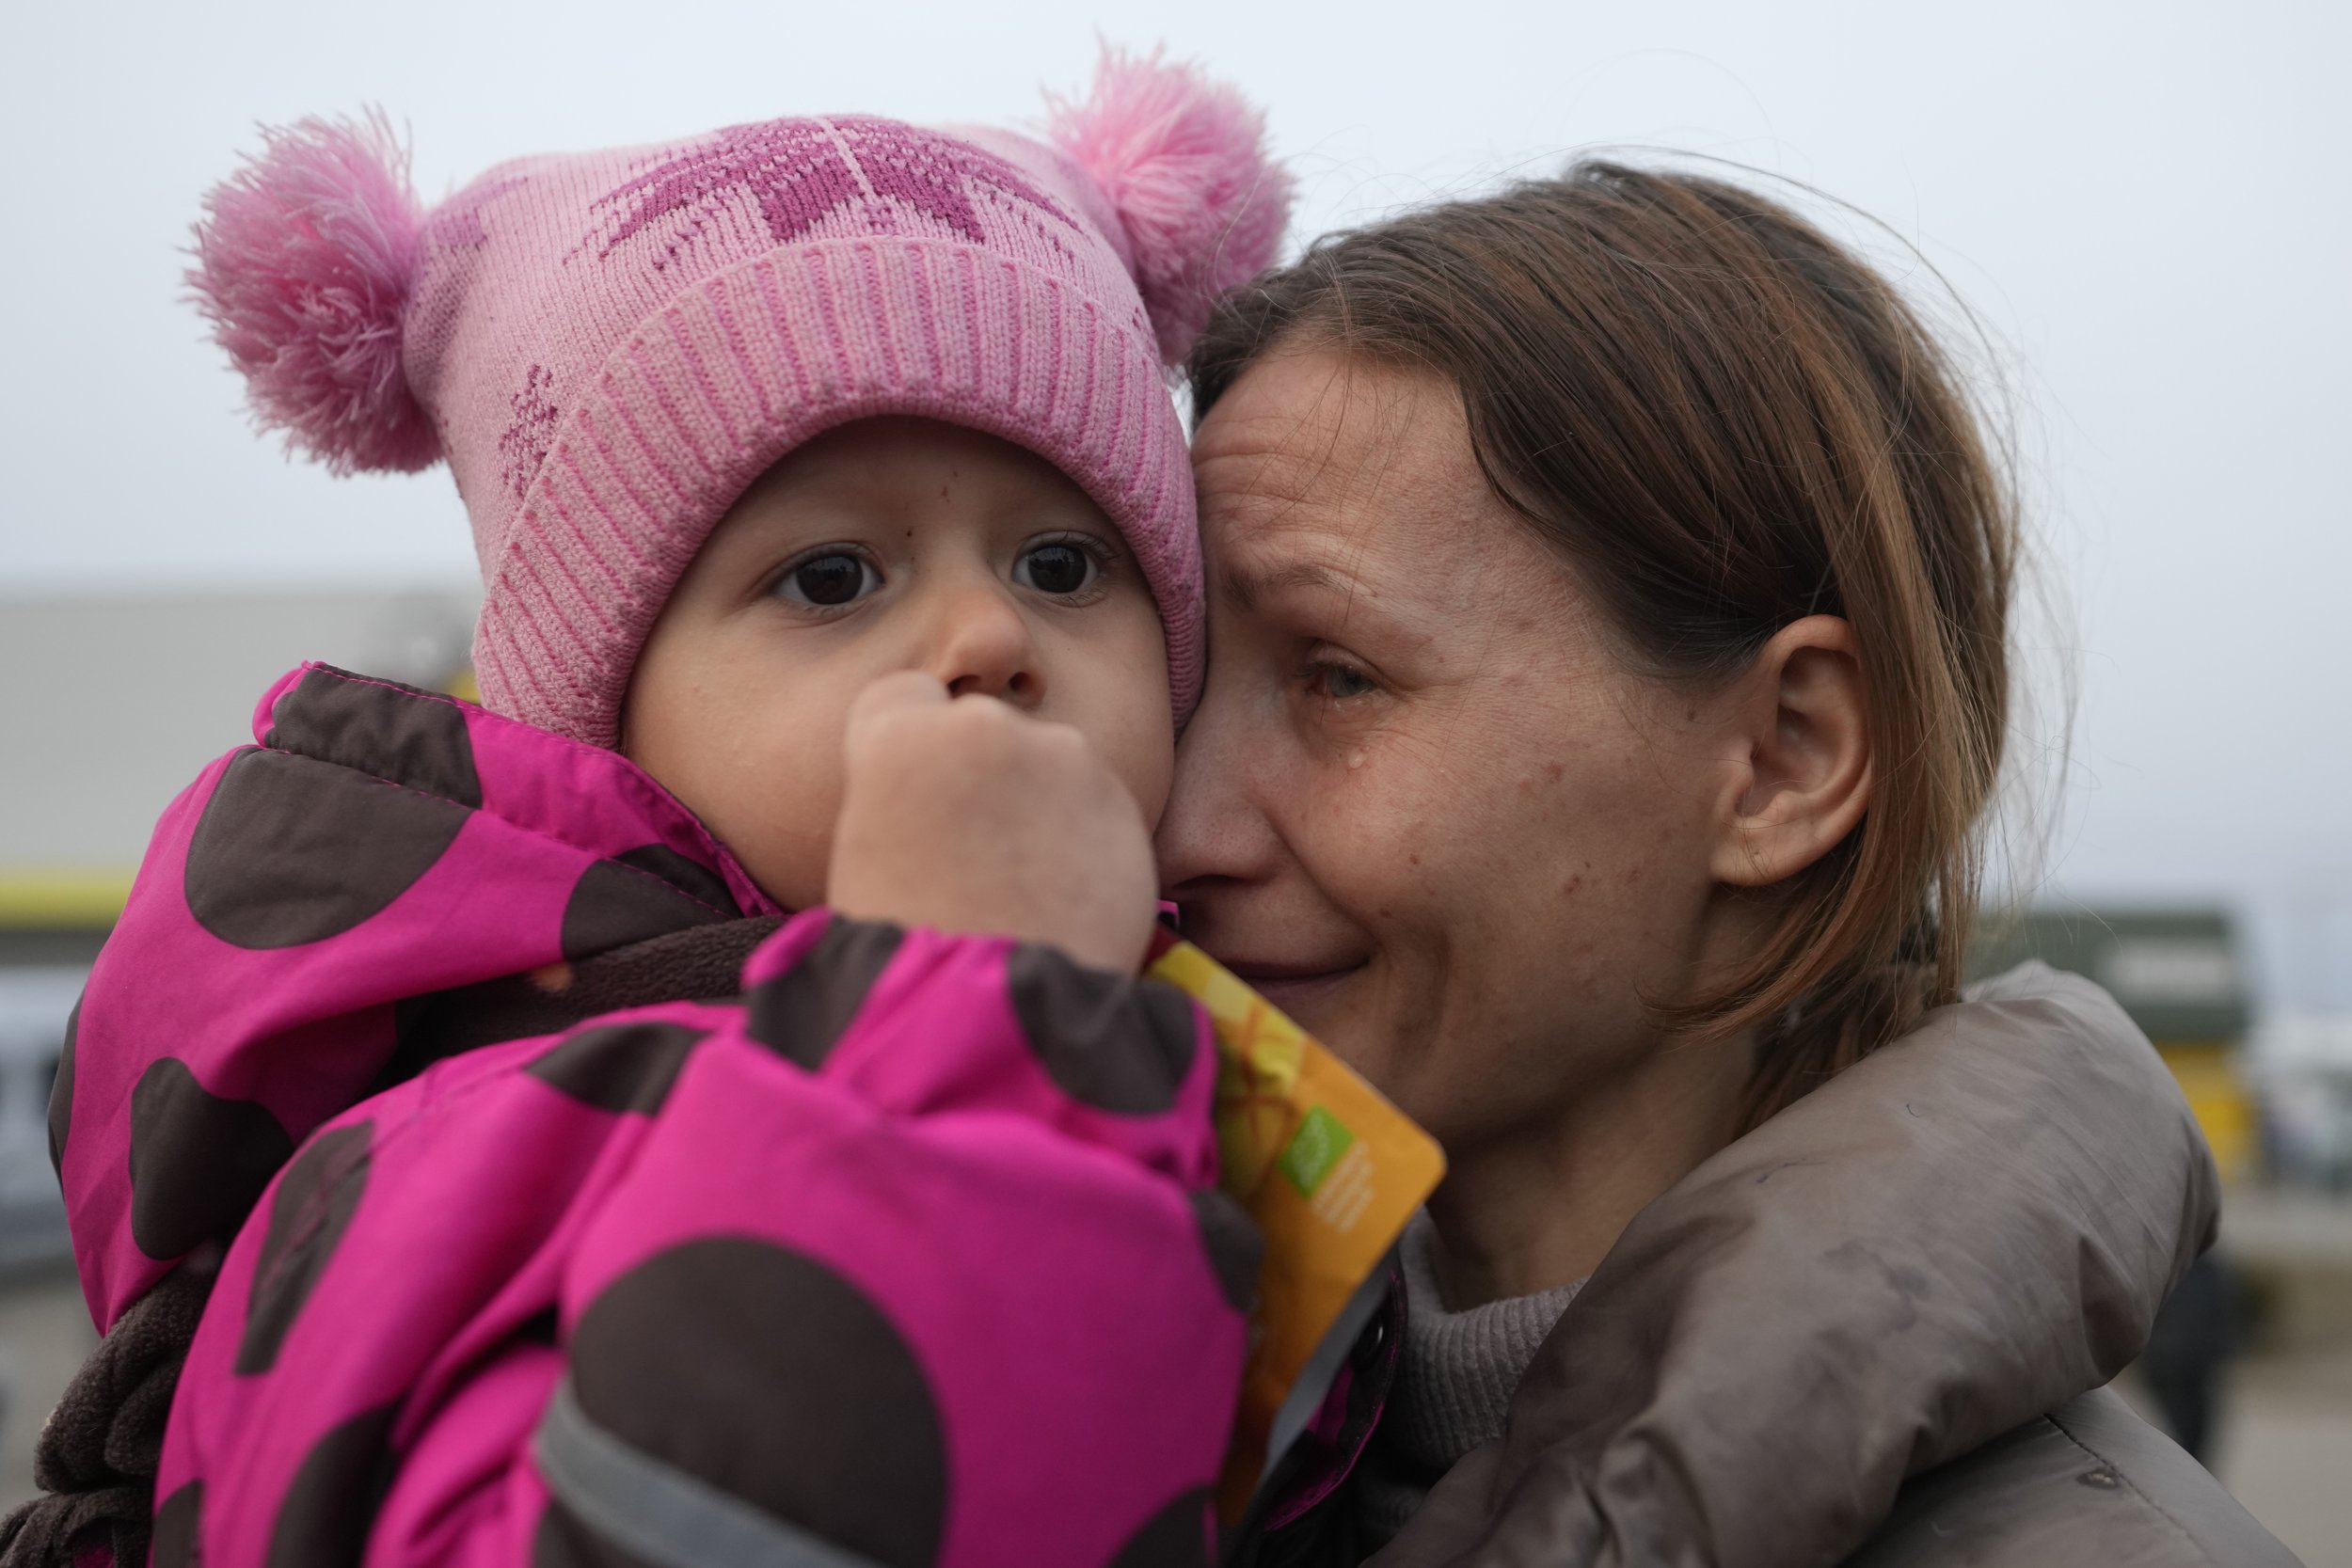  A women with a child who fled from the war in Ukraine reacts as they reunite with their family after crossing the border in Medyka, Poland, Tuesday, March 1, 2022. (AP Photo/Markus Schreiber) 